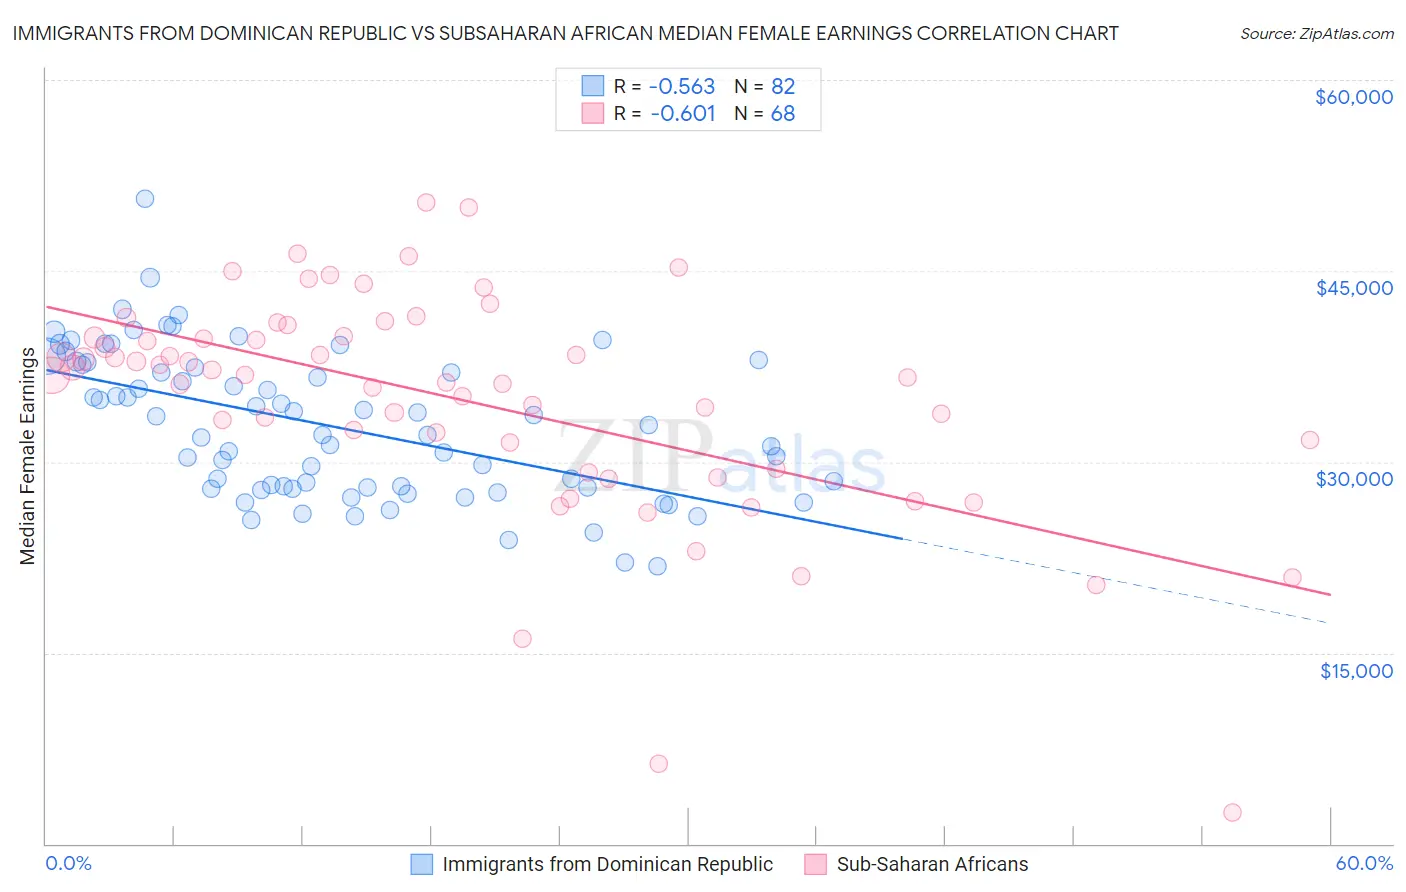 Immigrants from Dominican Republic vs Subsaharan African Median Female Earnings